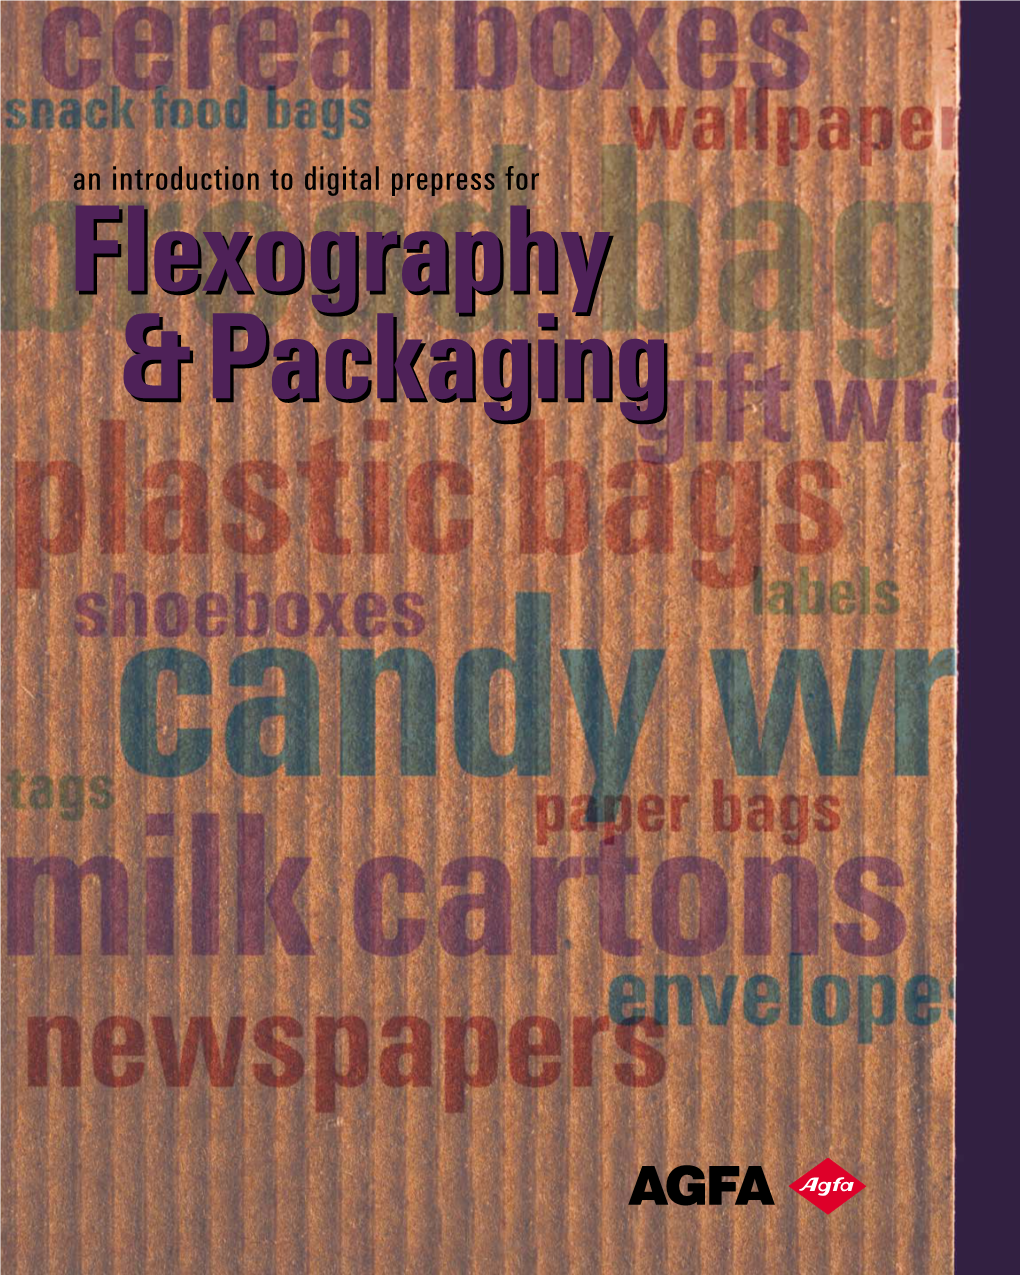 Flexo and Packaging.Pdf